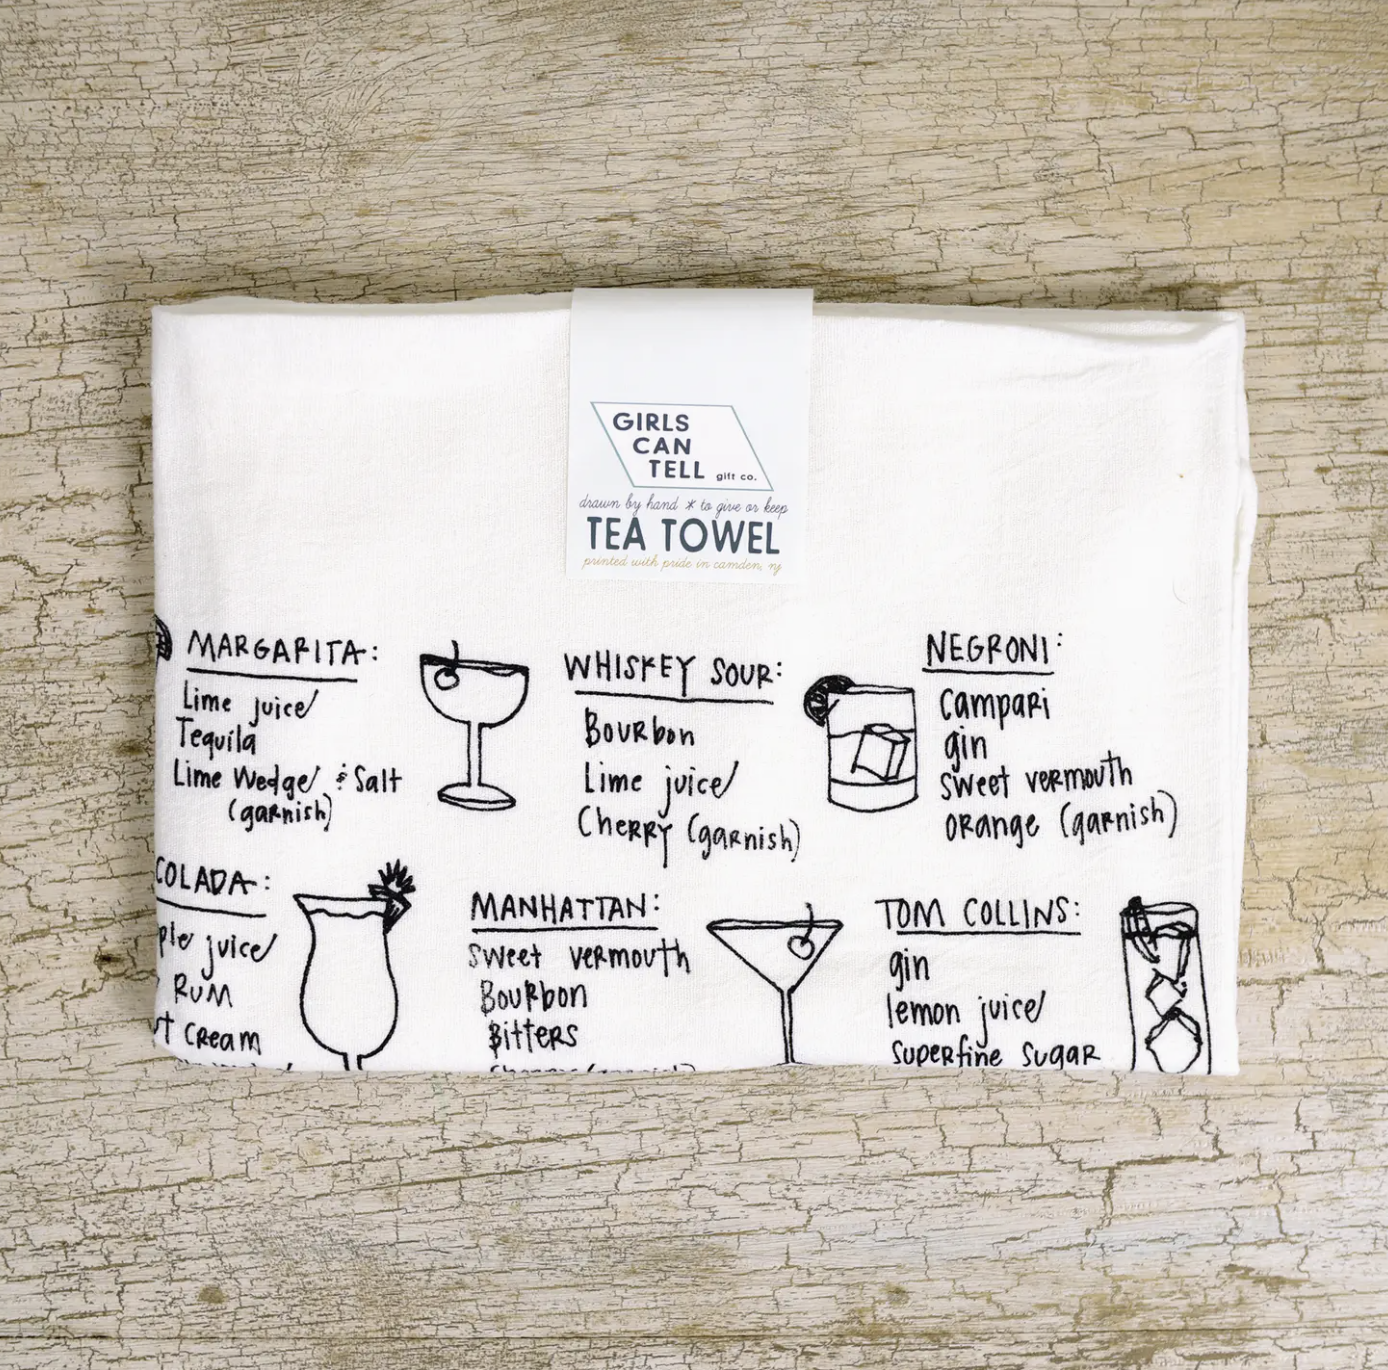 Girls Can Tell Cocktail Recipes Tea Towel